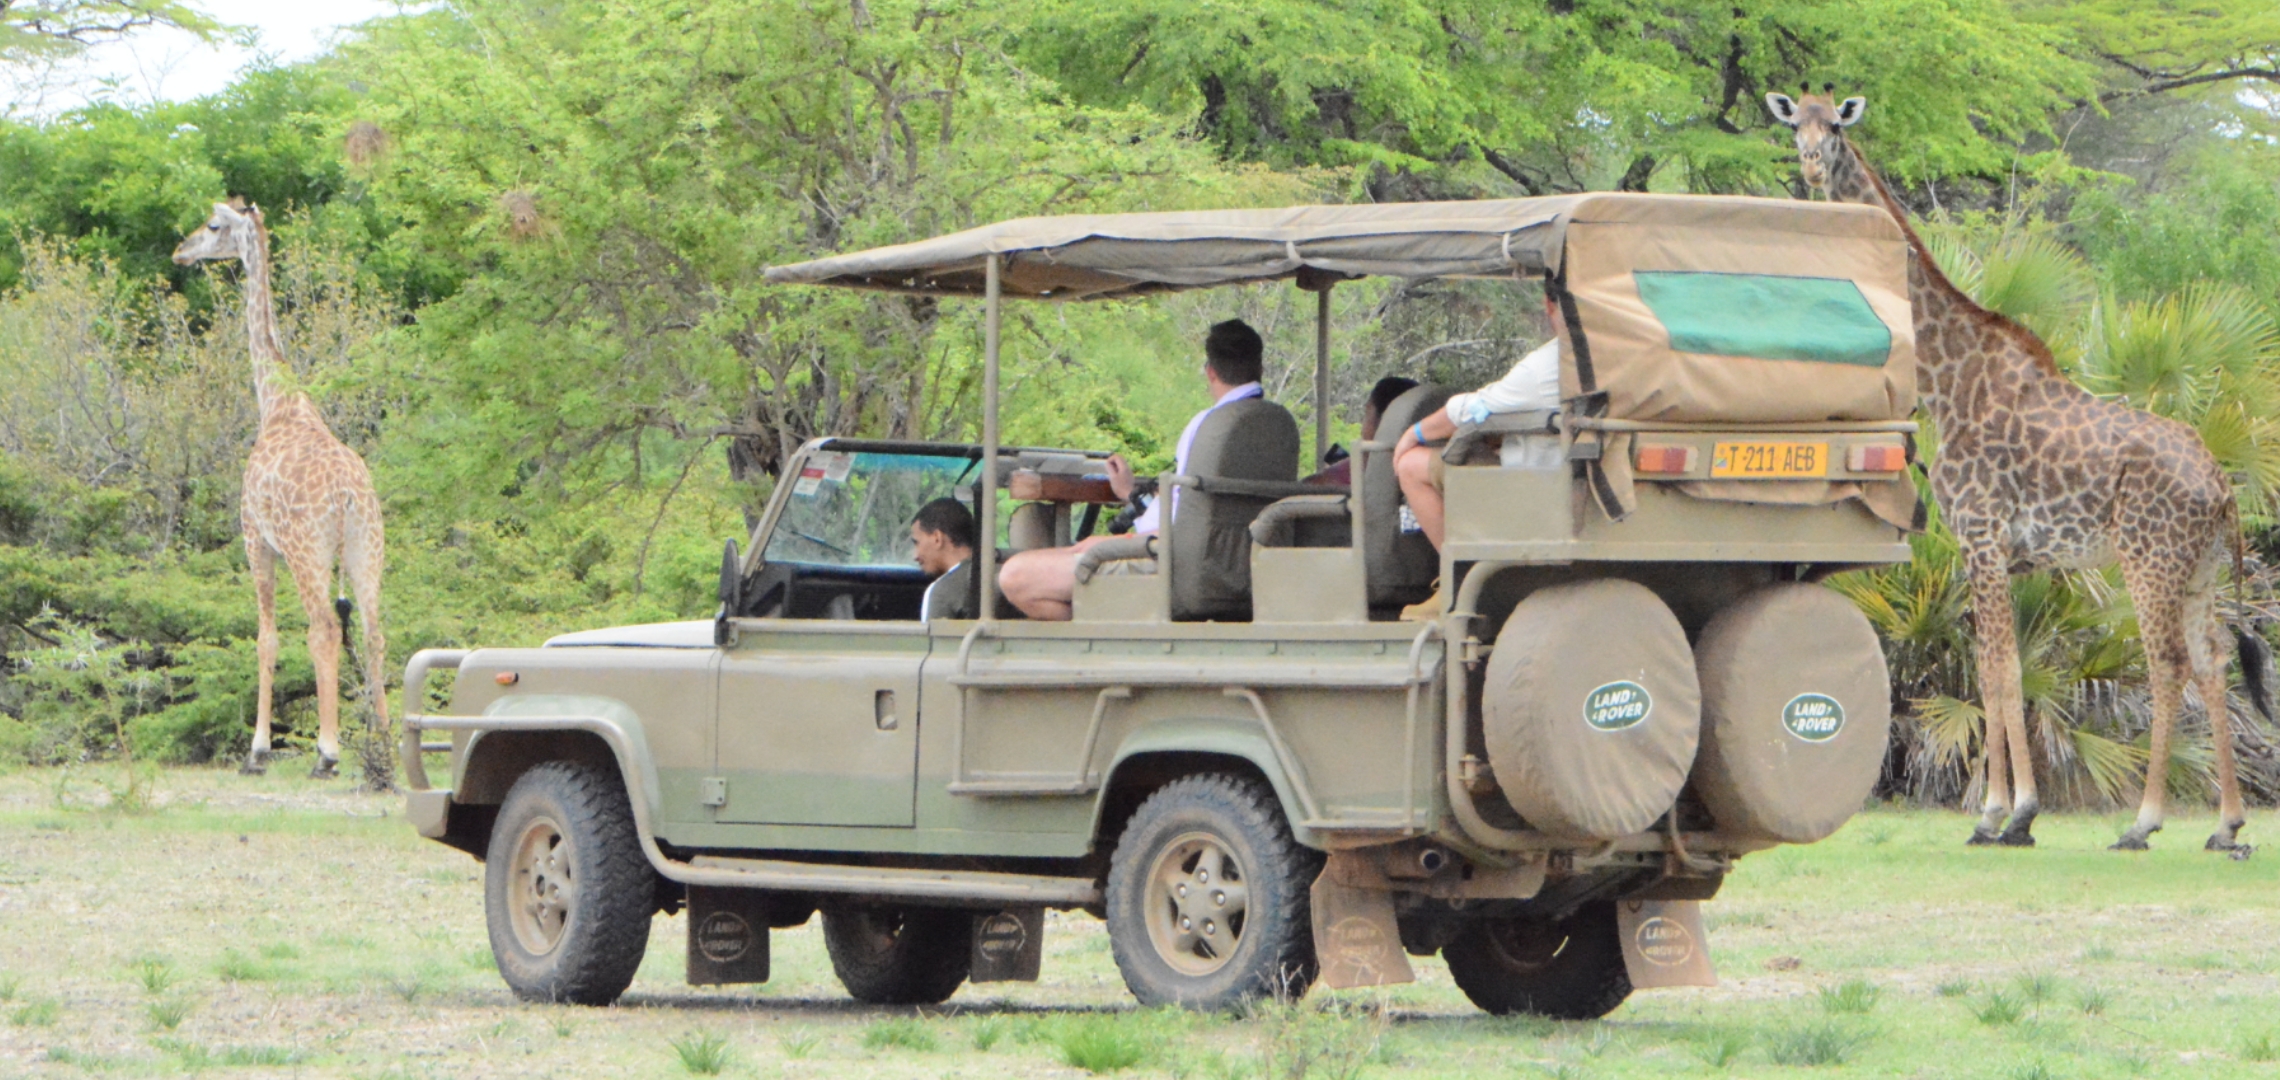 Day 2: Full-day Game Drive in Nyerere National Park